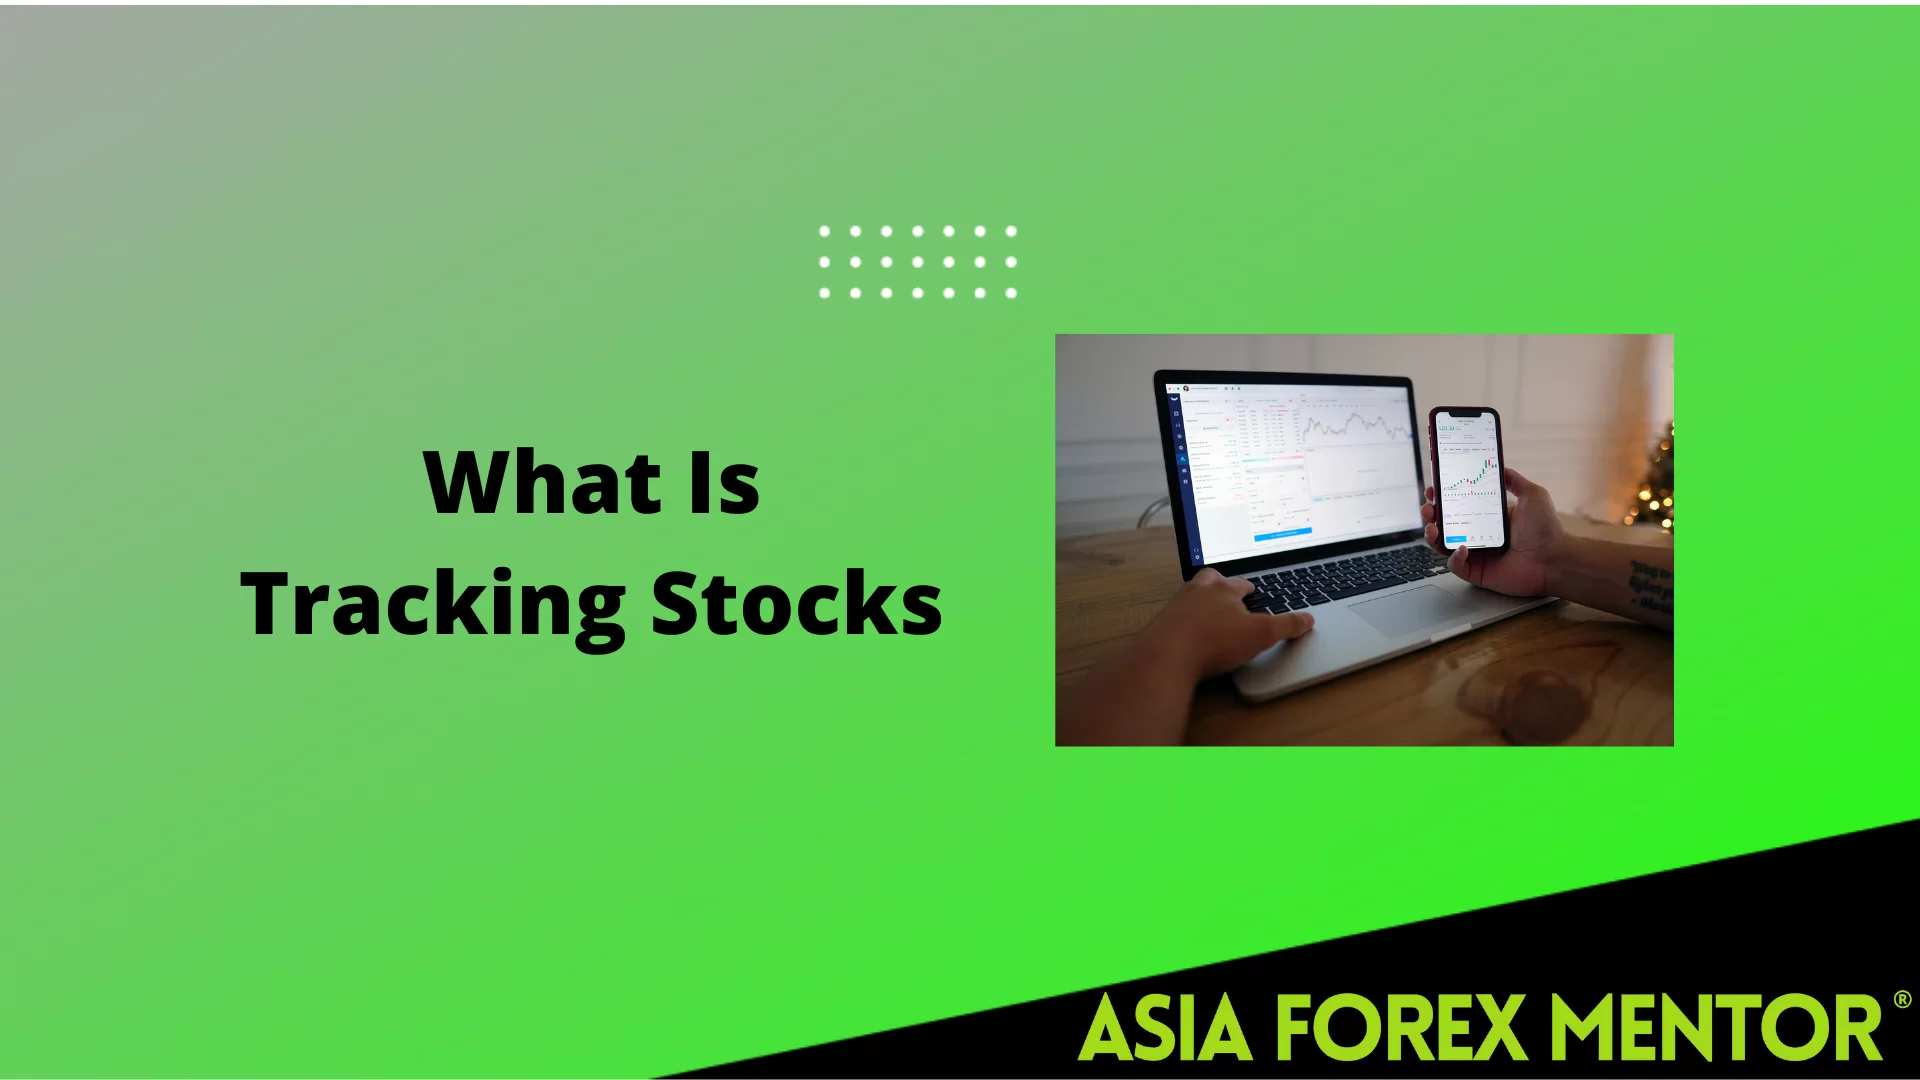 What Is Tracking Stocks